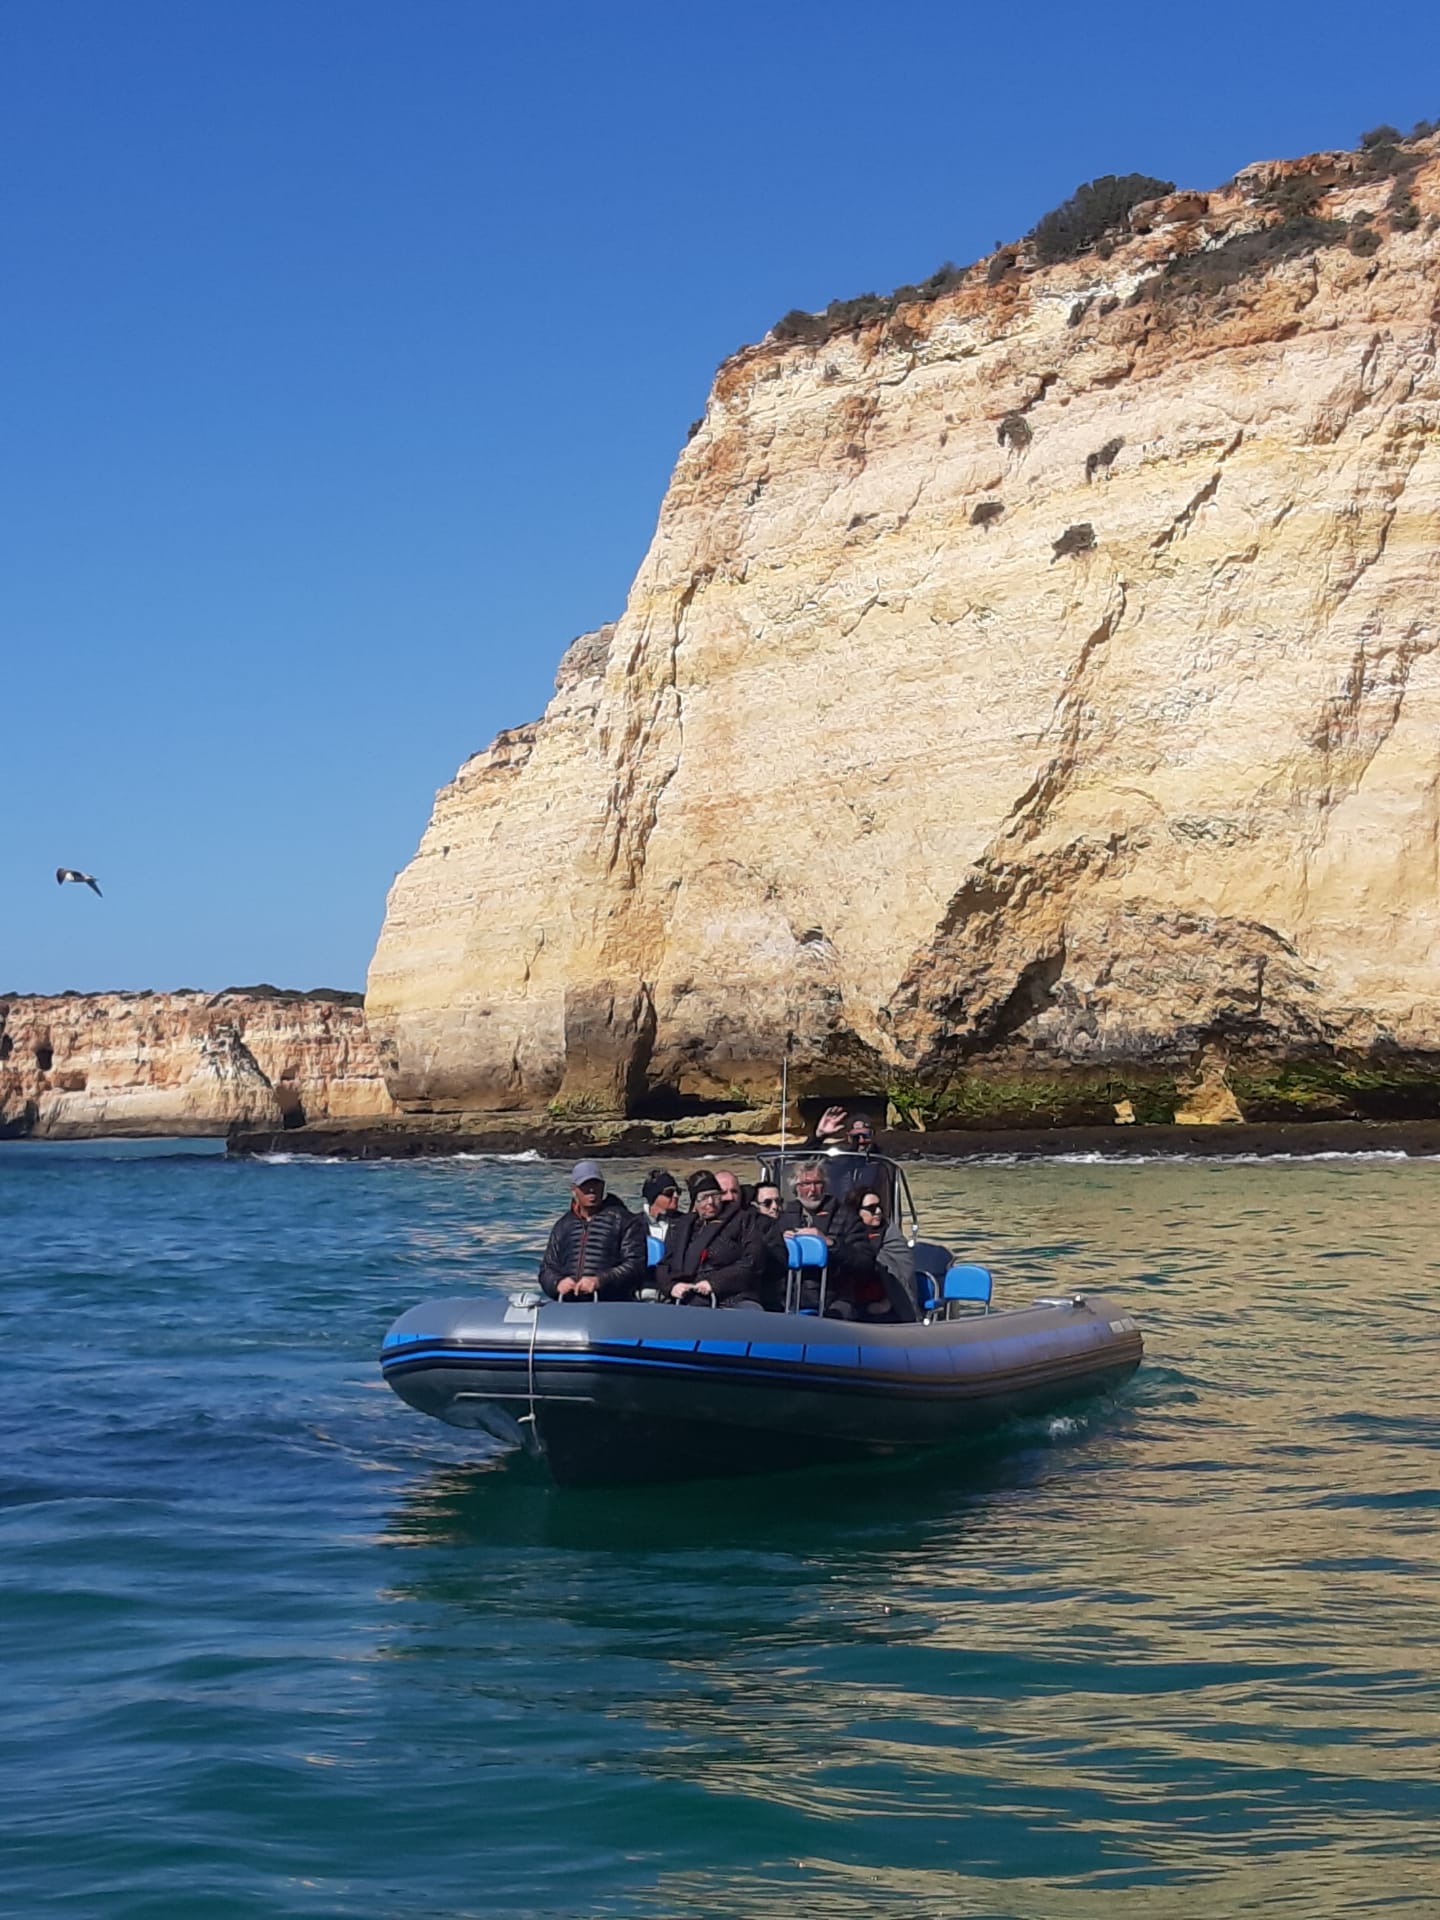 A must do tour in the Algarve